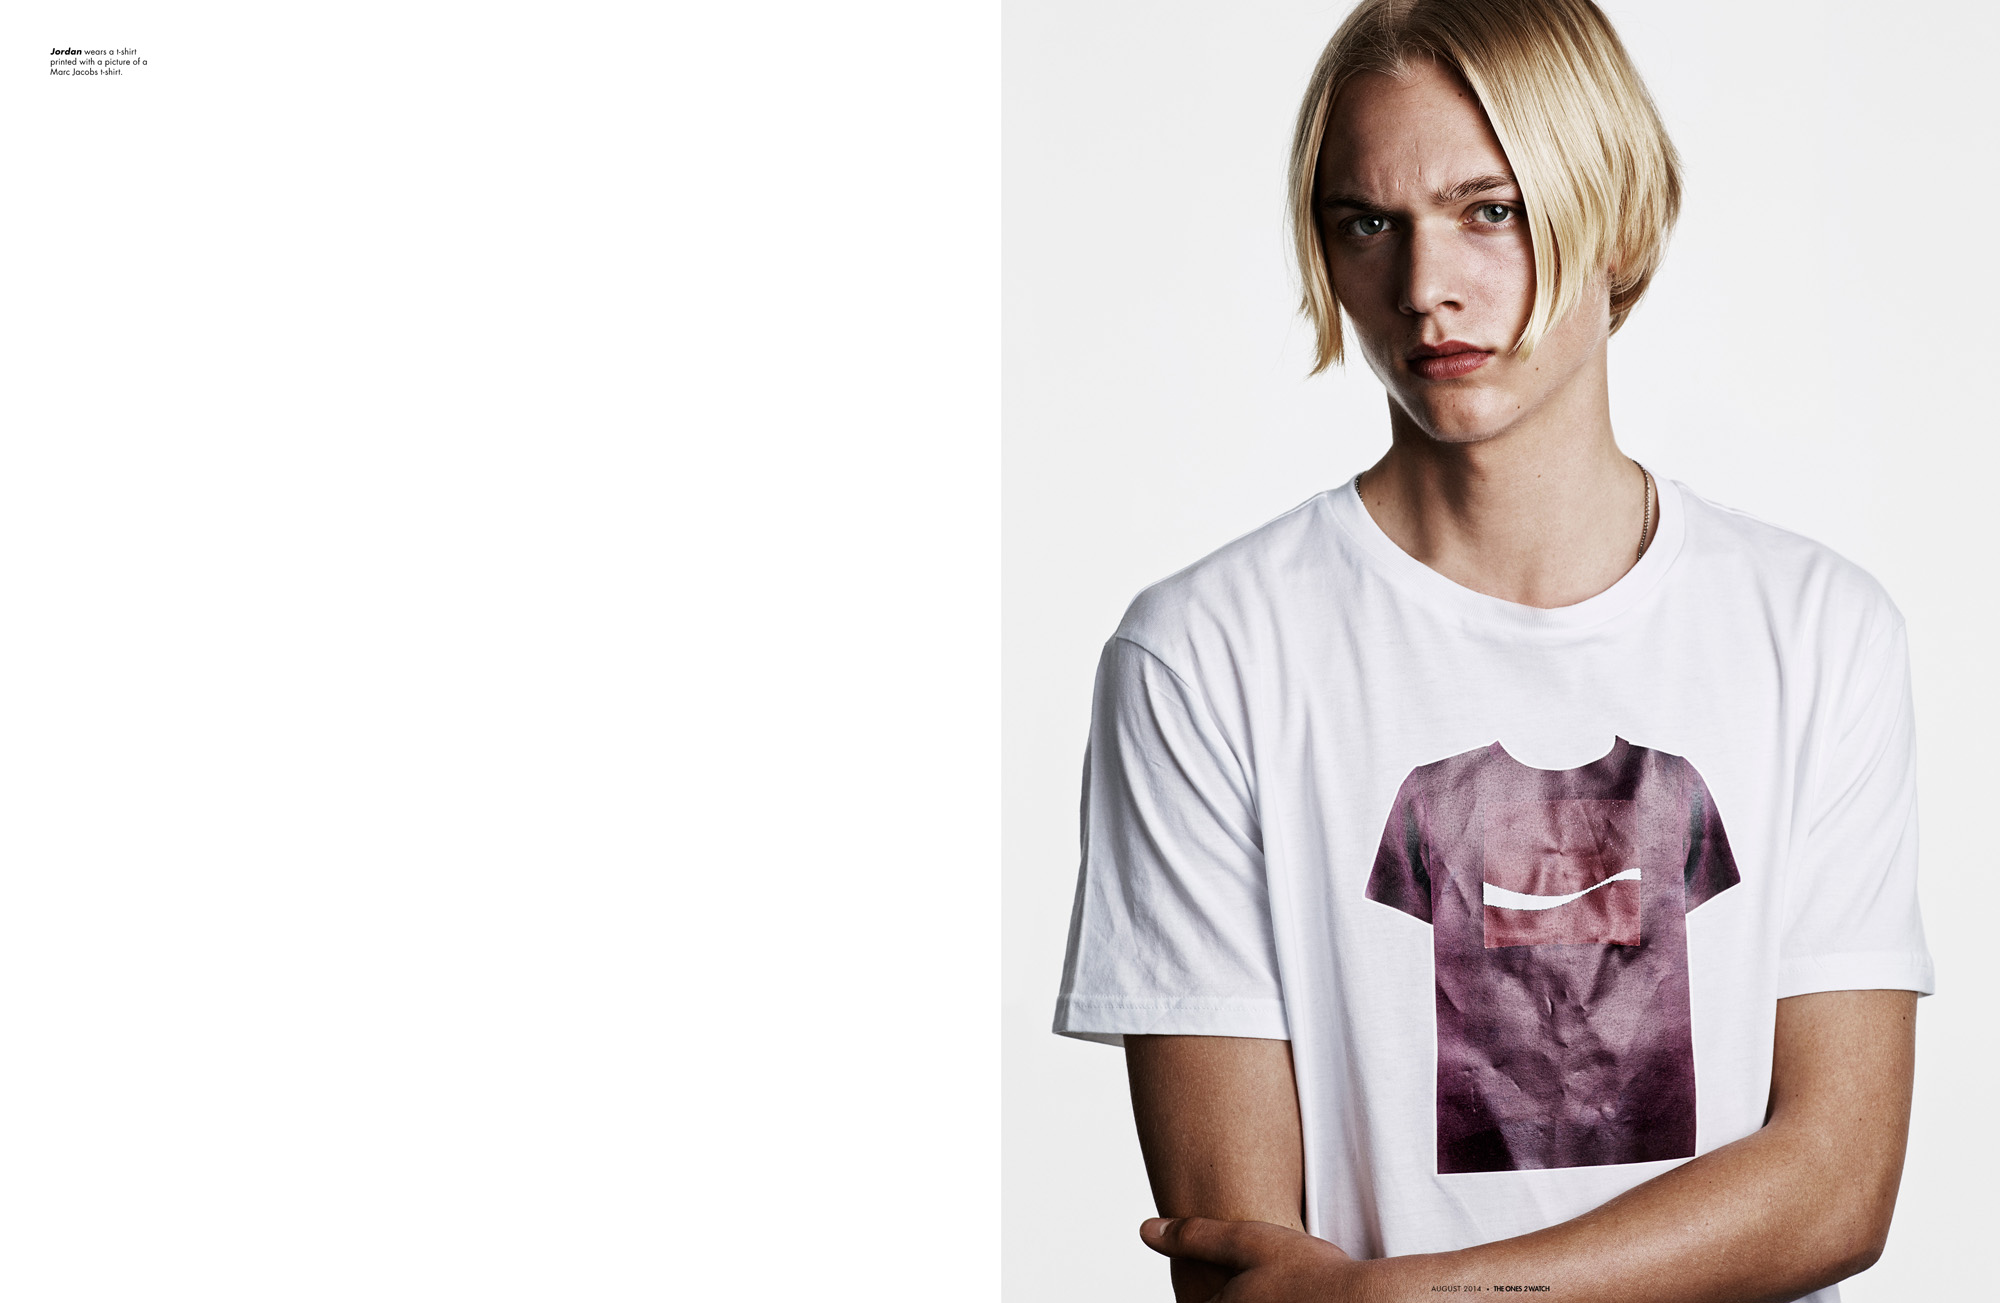 Jordan wears a t-shirt printed with a picture of a Marc Jacobs t-shirt.